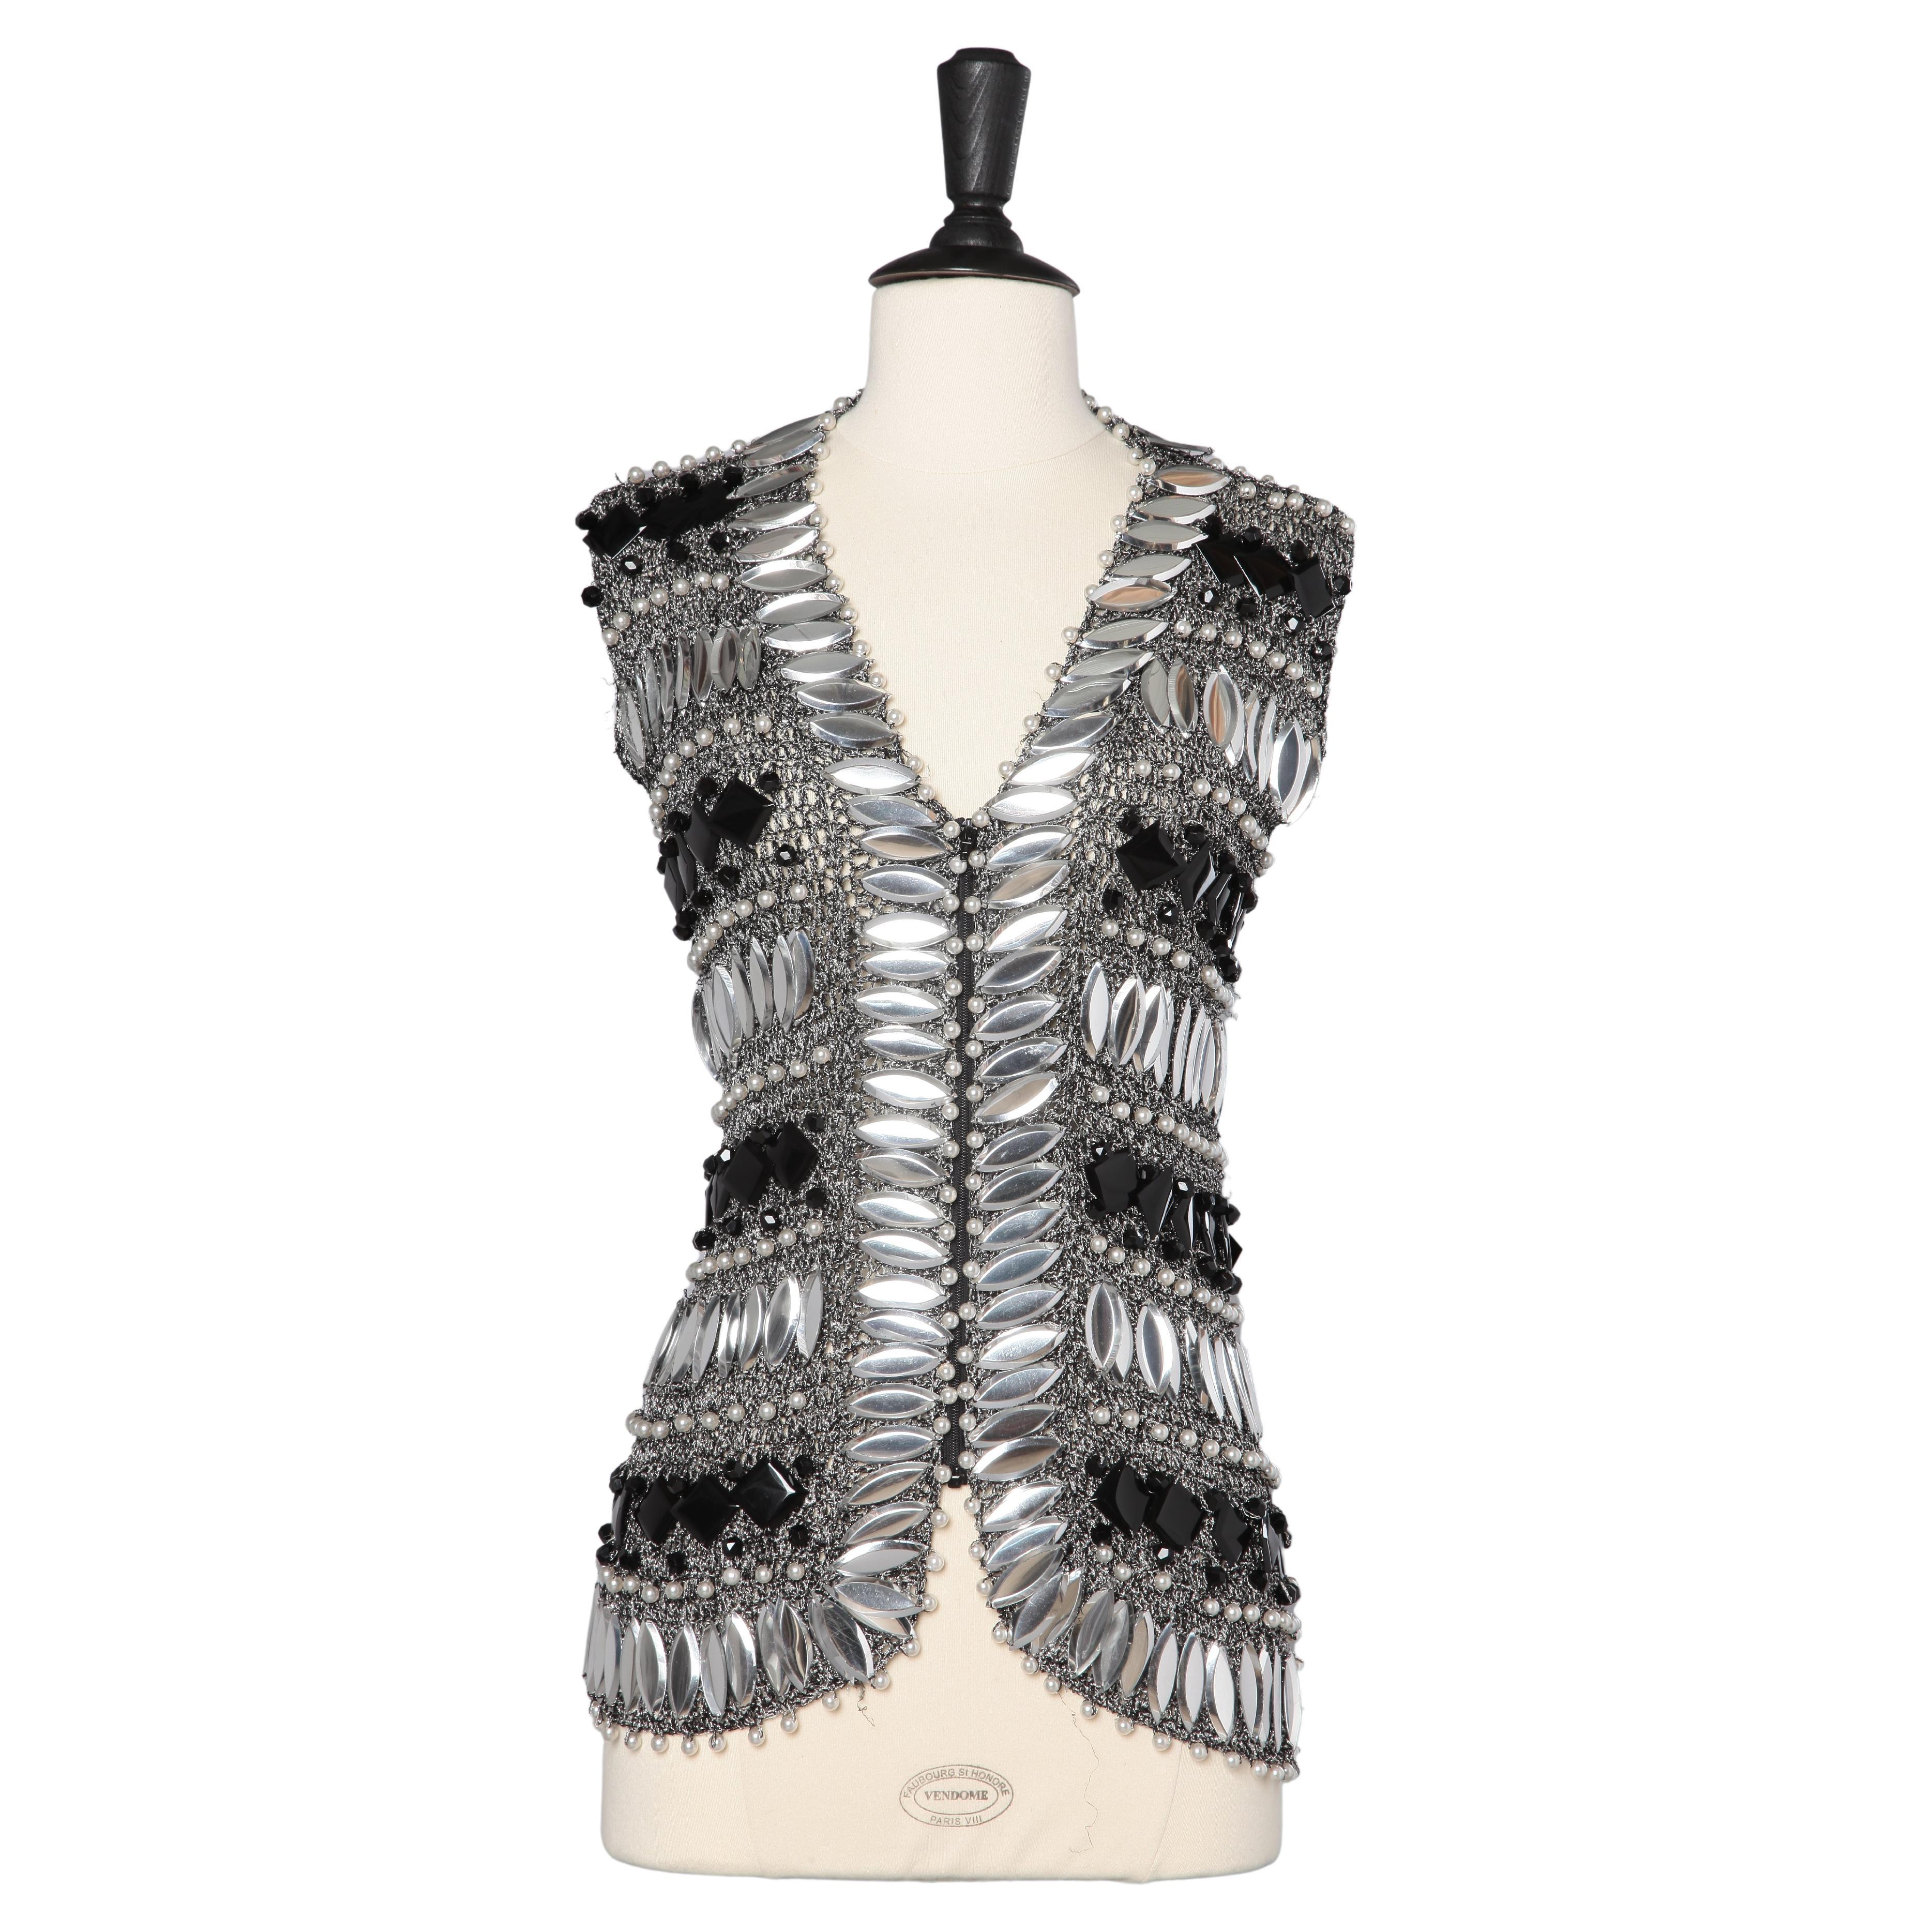 Silver and black lurex knit vest with rhinestone and pearls Loris Azzaro